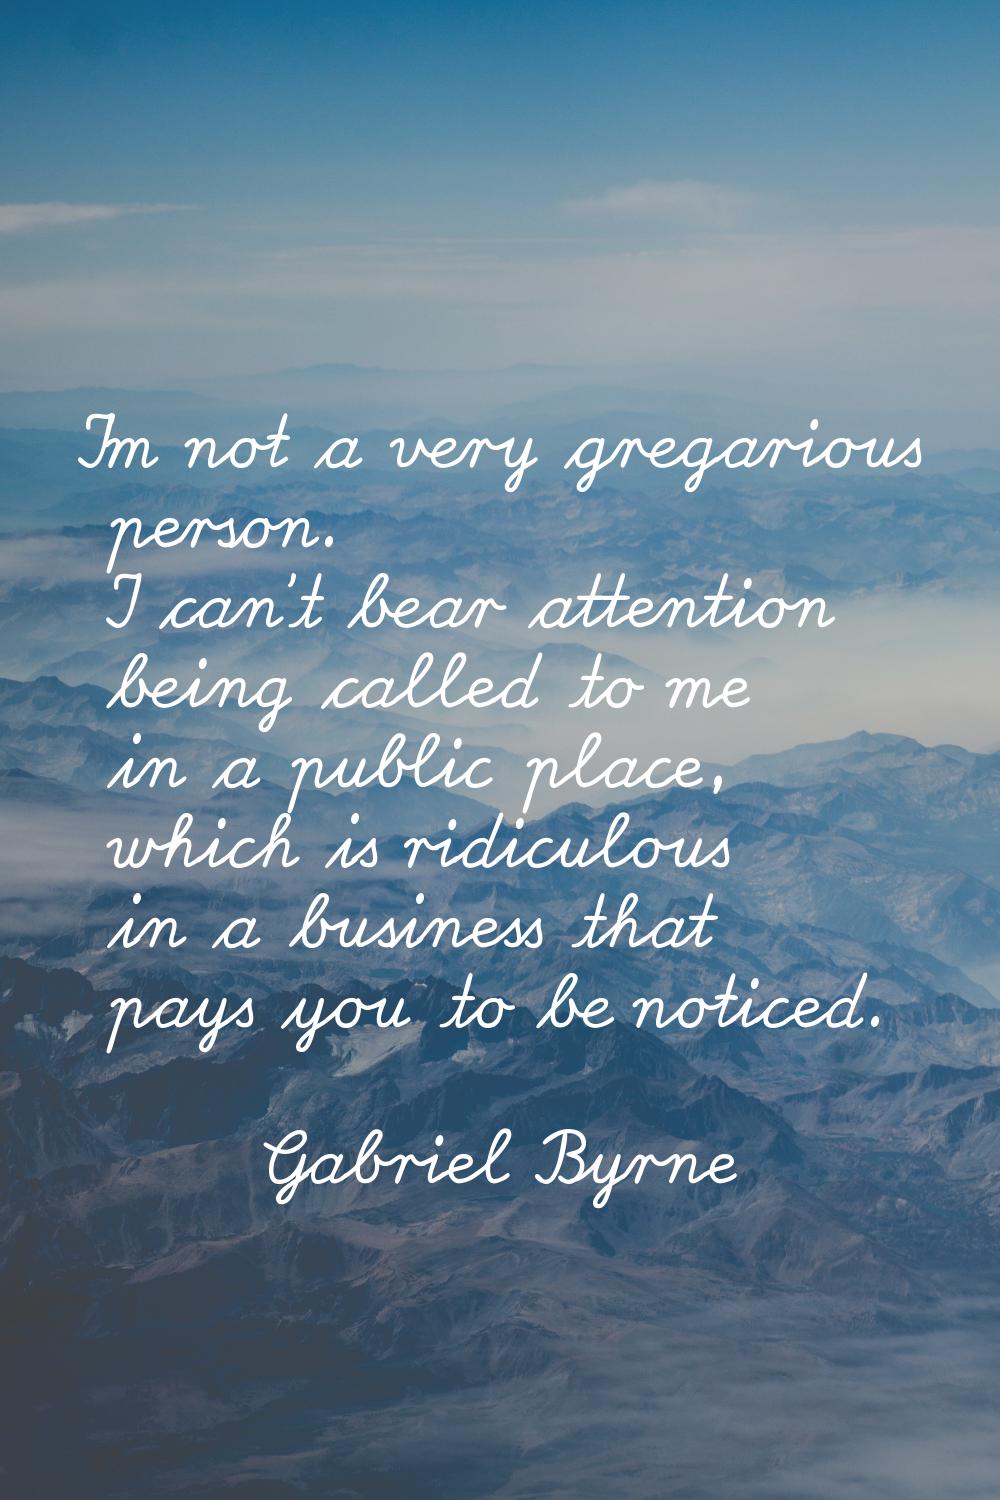 I'm not a very gregarious person. I can't bear attention being called to me in a public place, whic